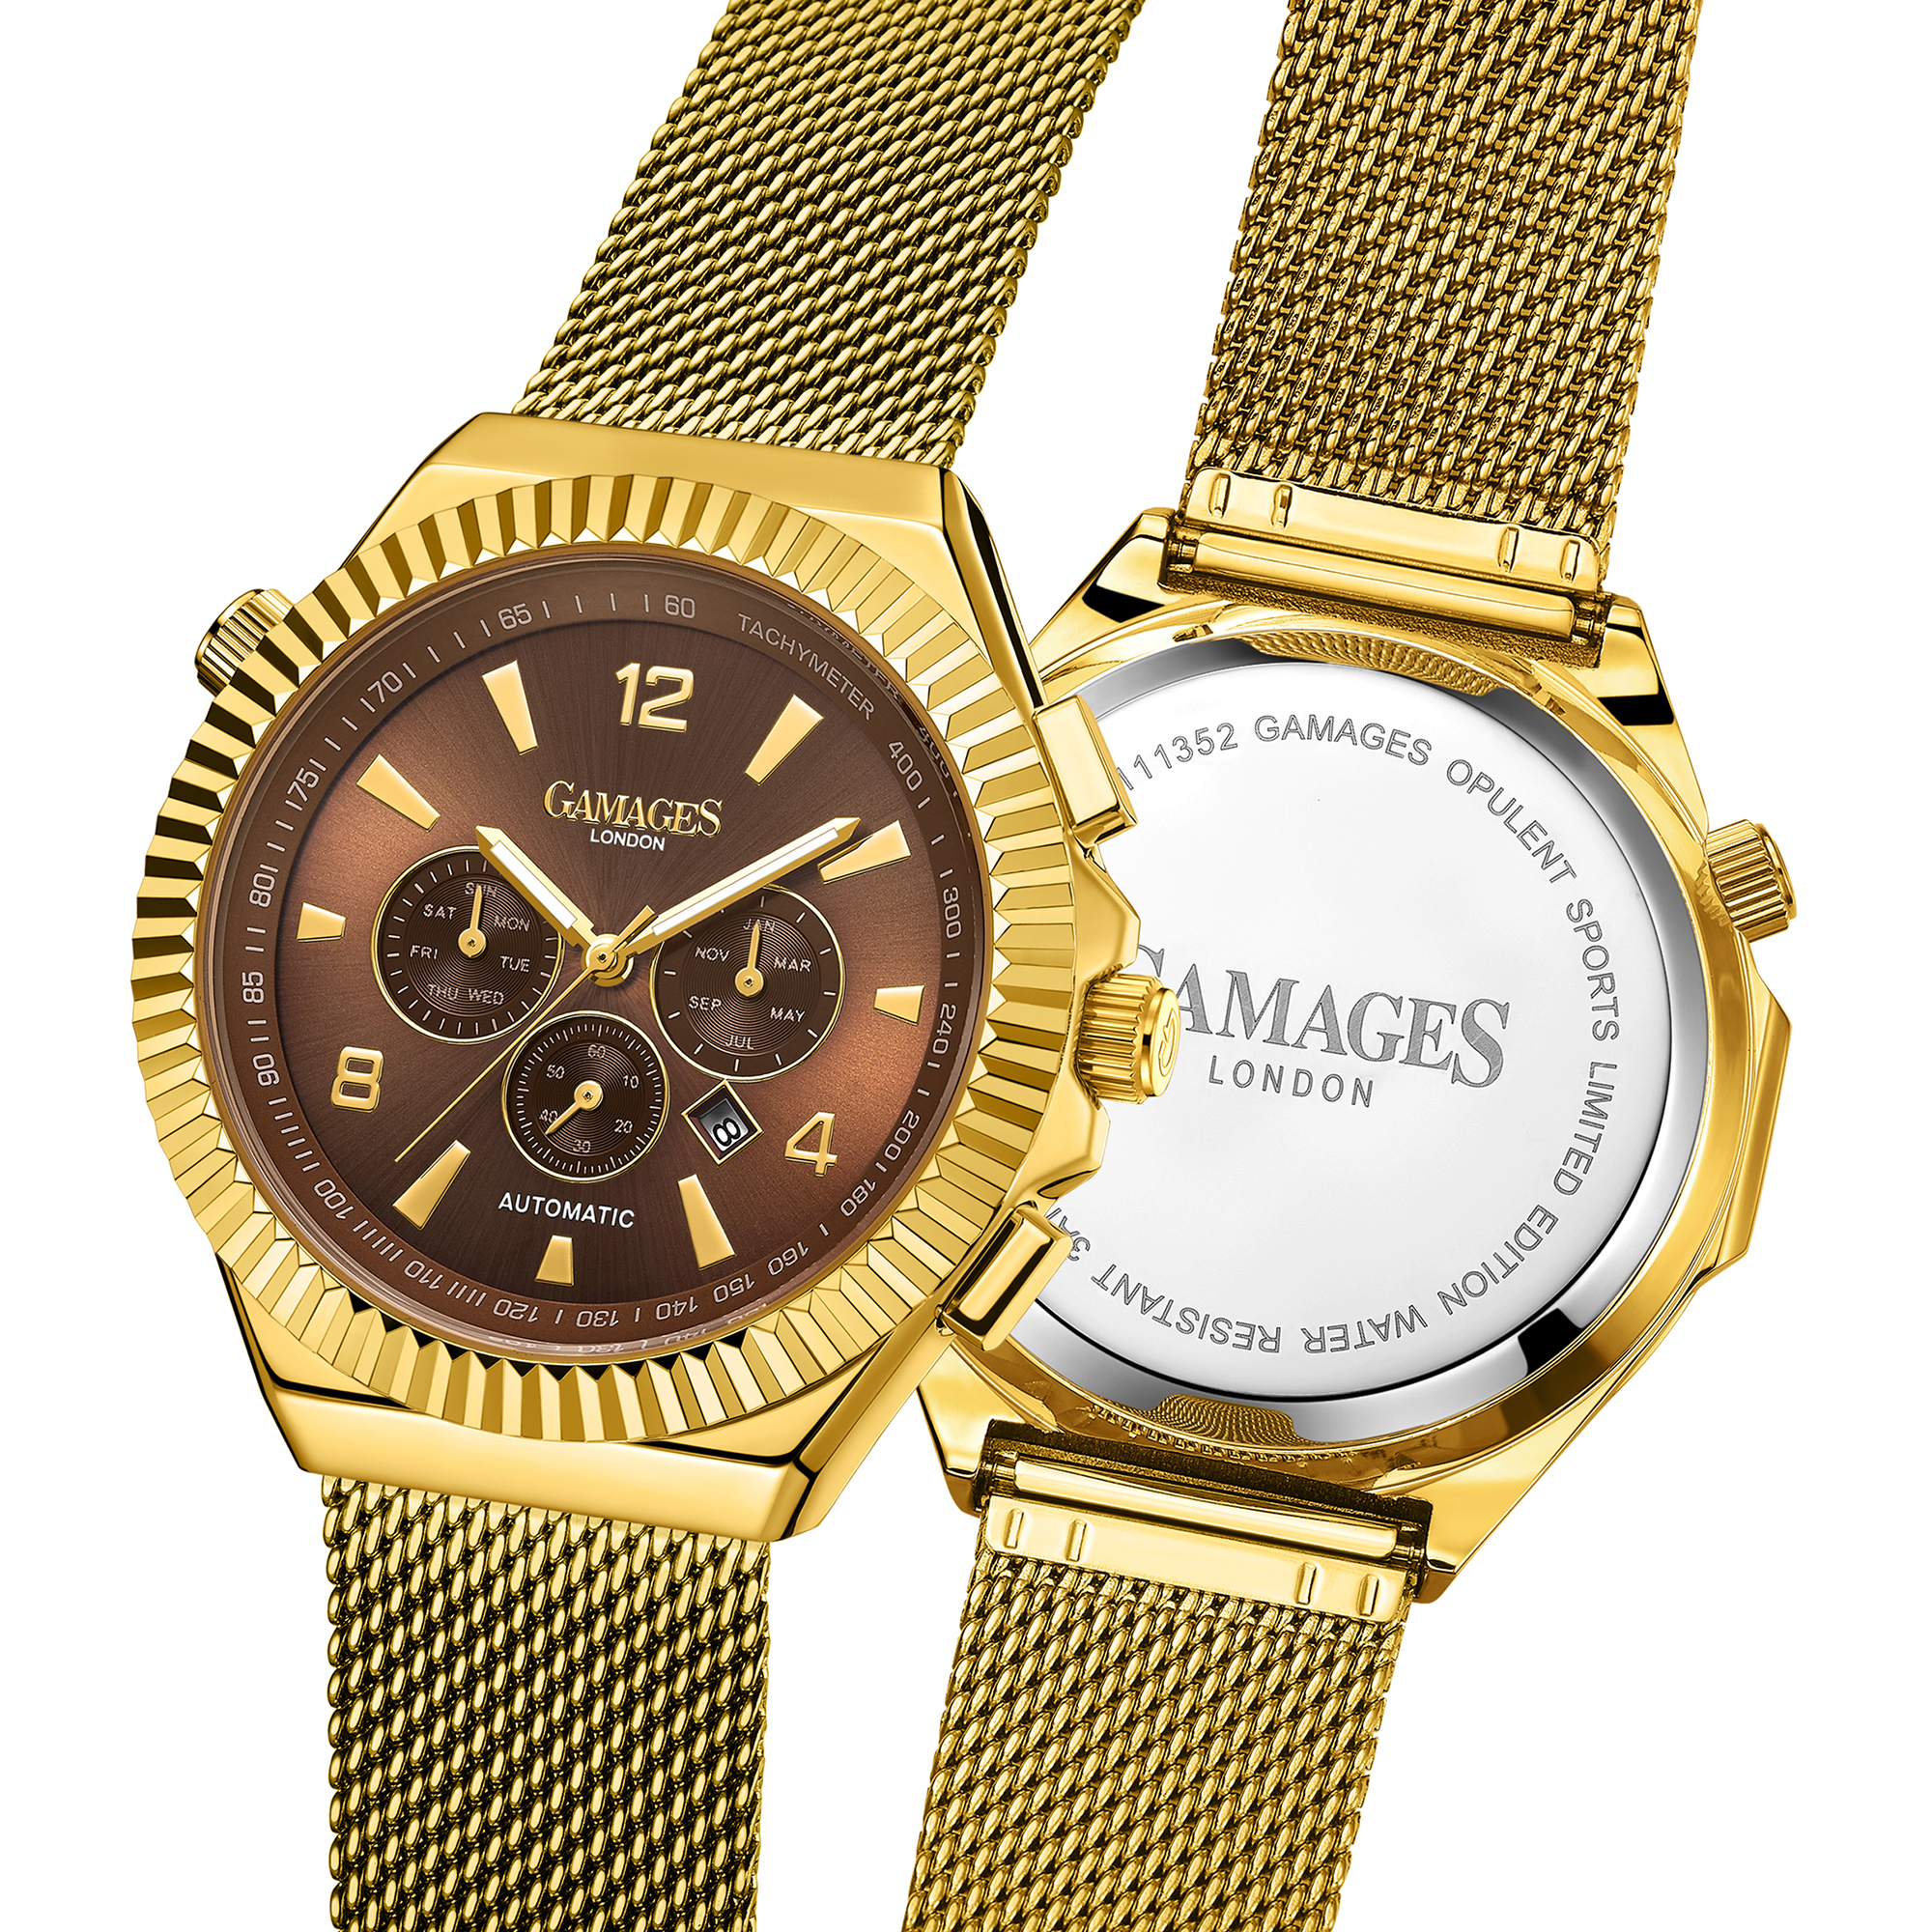 Gamages of London Hand Assembled Opulent Sports Automatic Gold - 5 Years Warranty and Free Deliver.. - Image 6 of 6